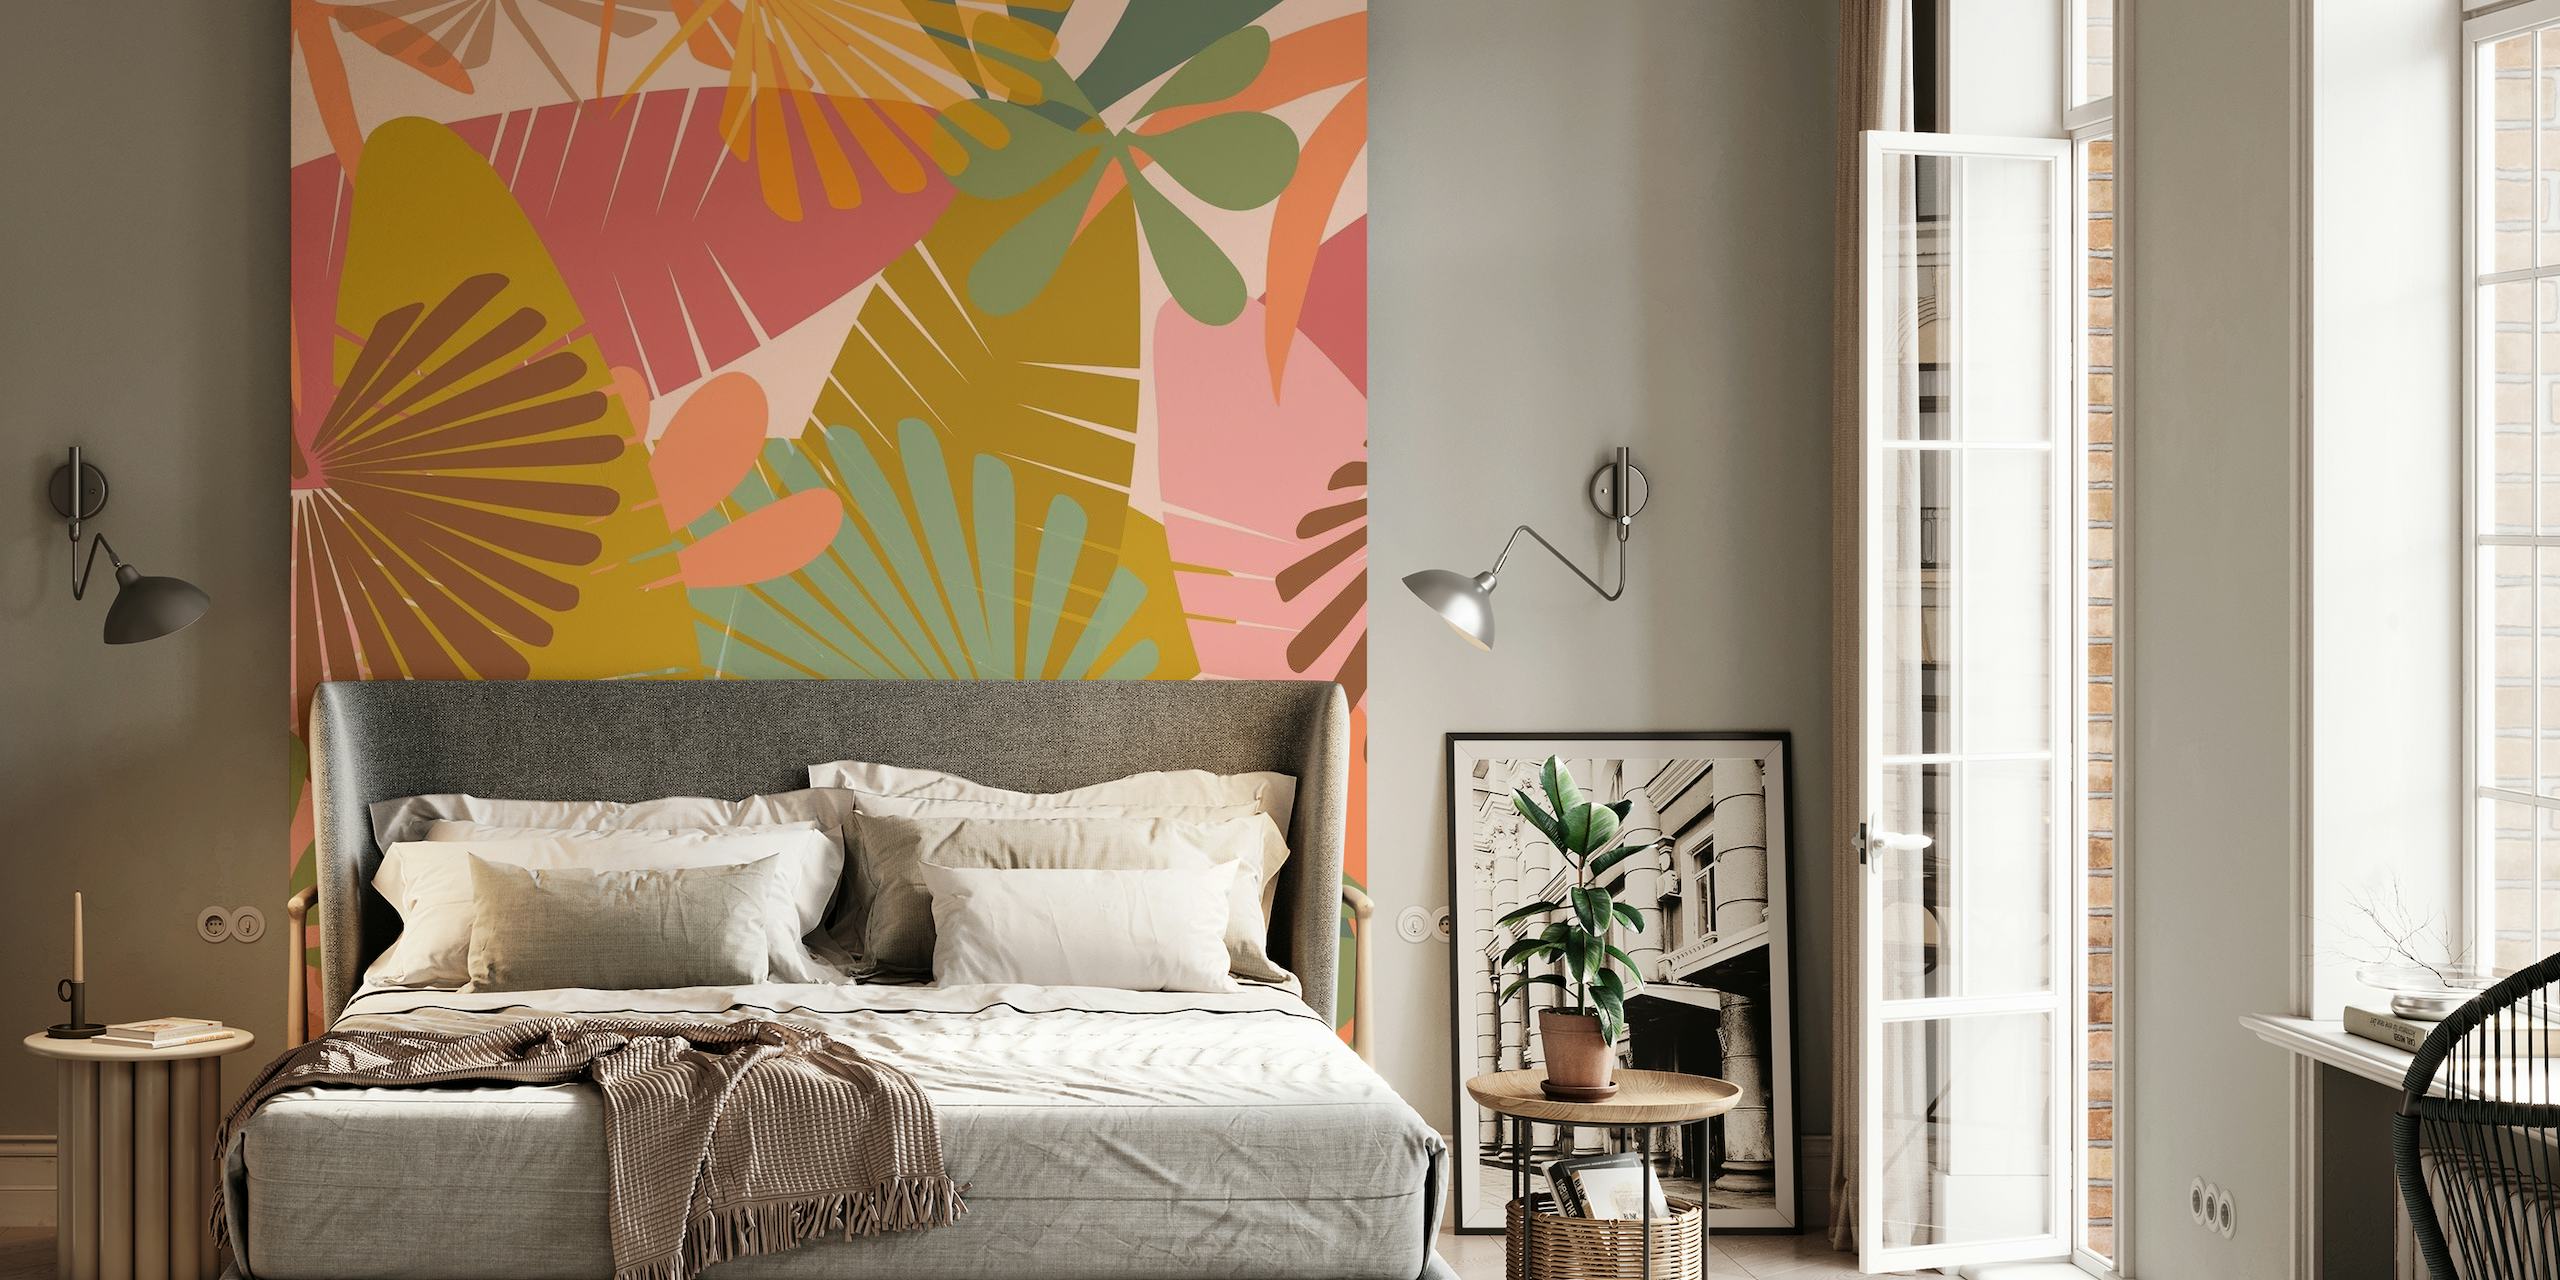 Abstract tropical leaf pattern wall mural in coral, ochre, and green hues